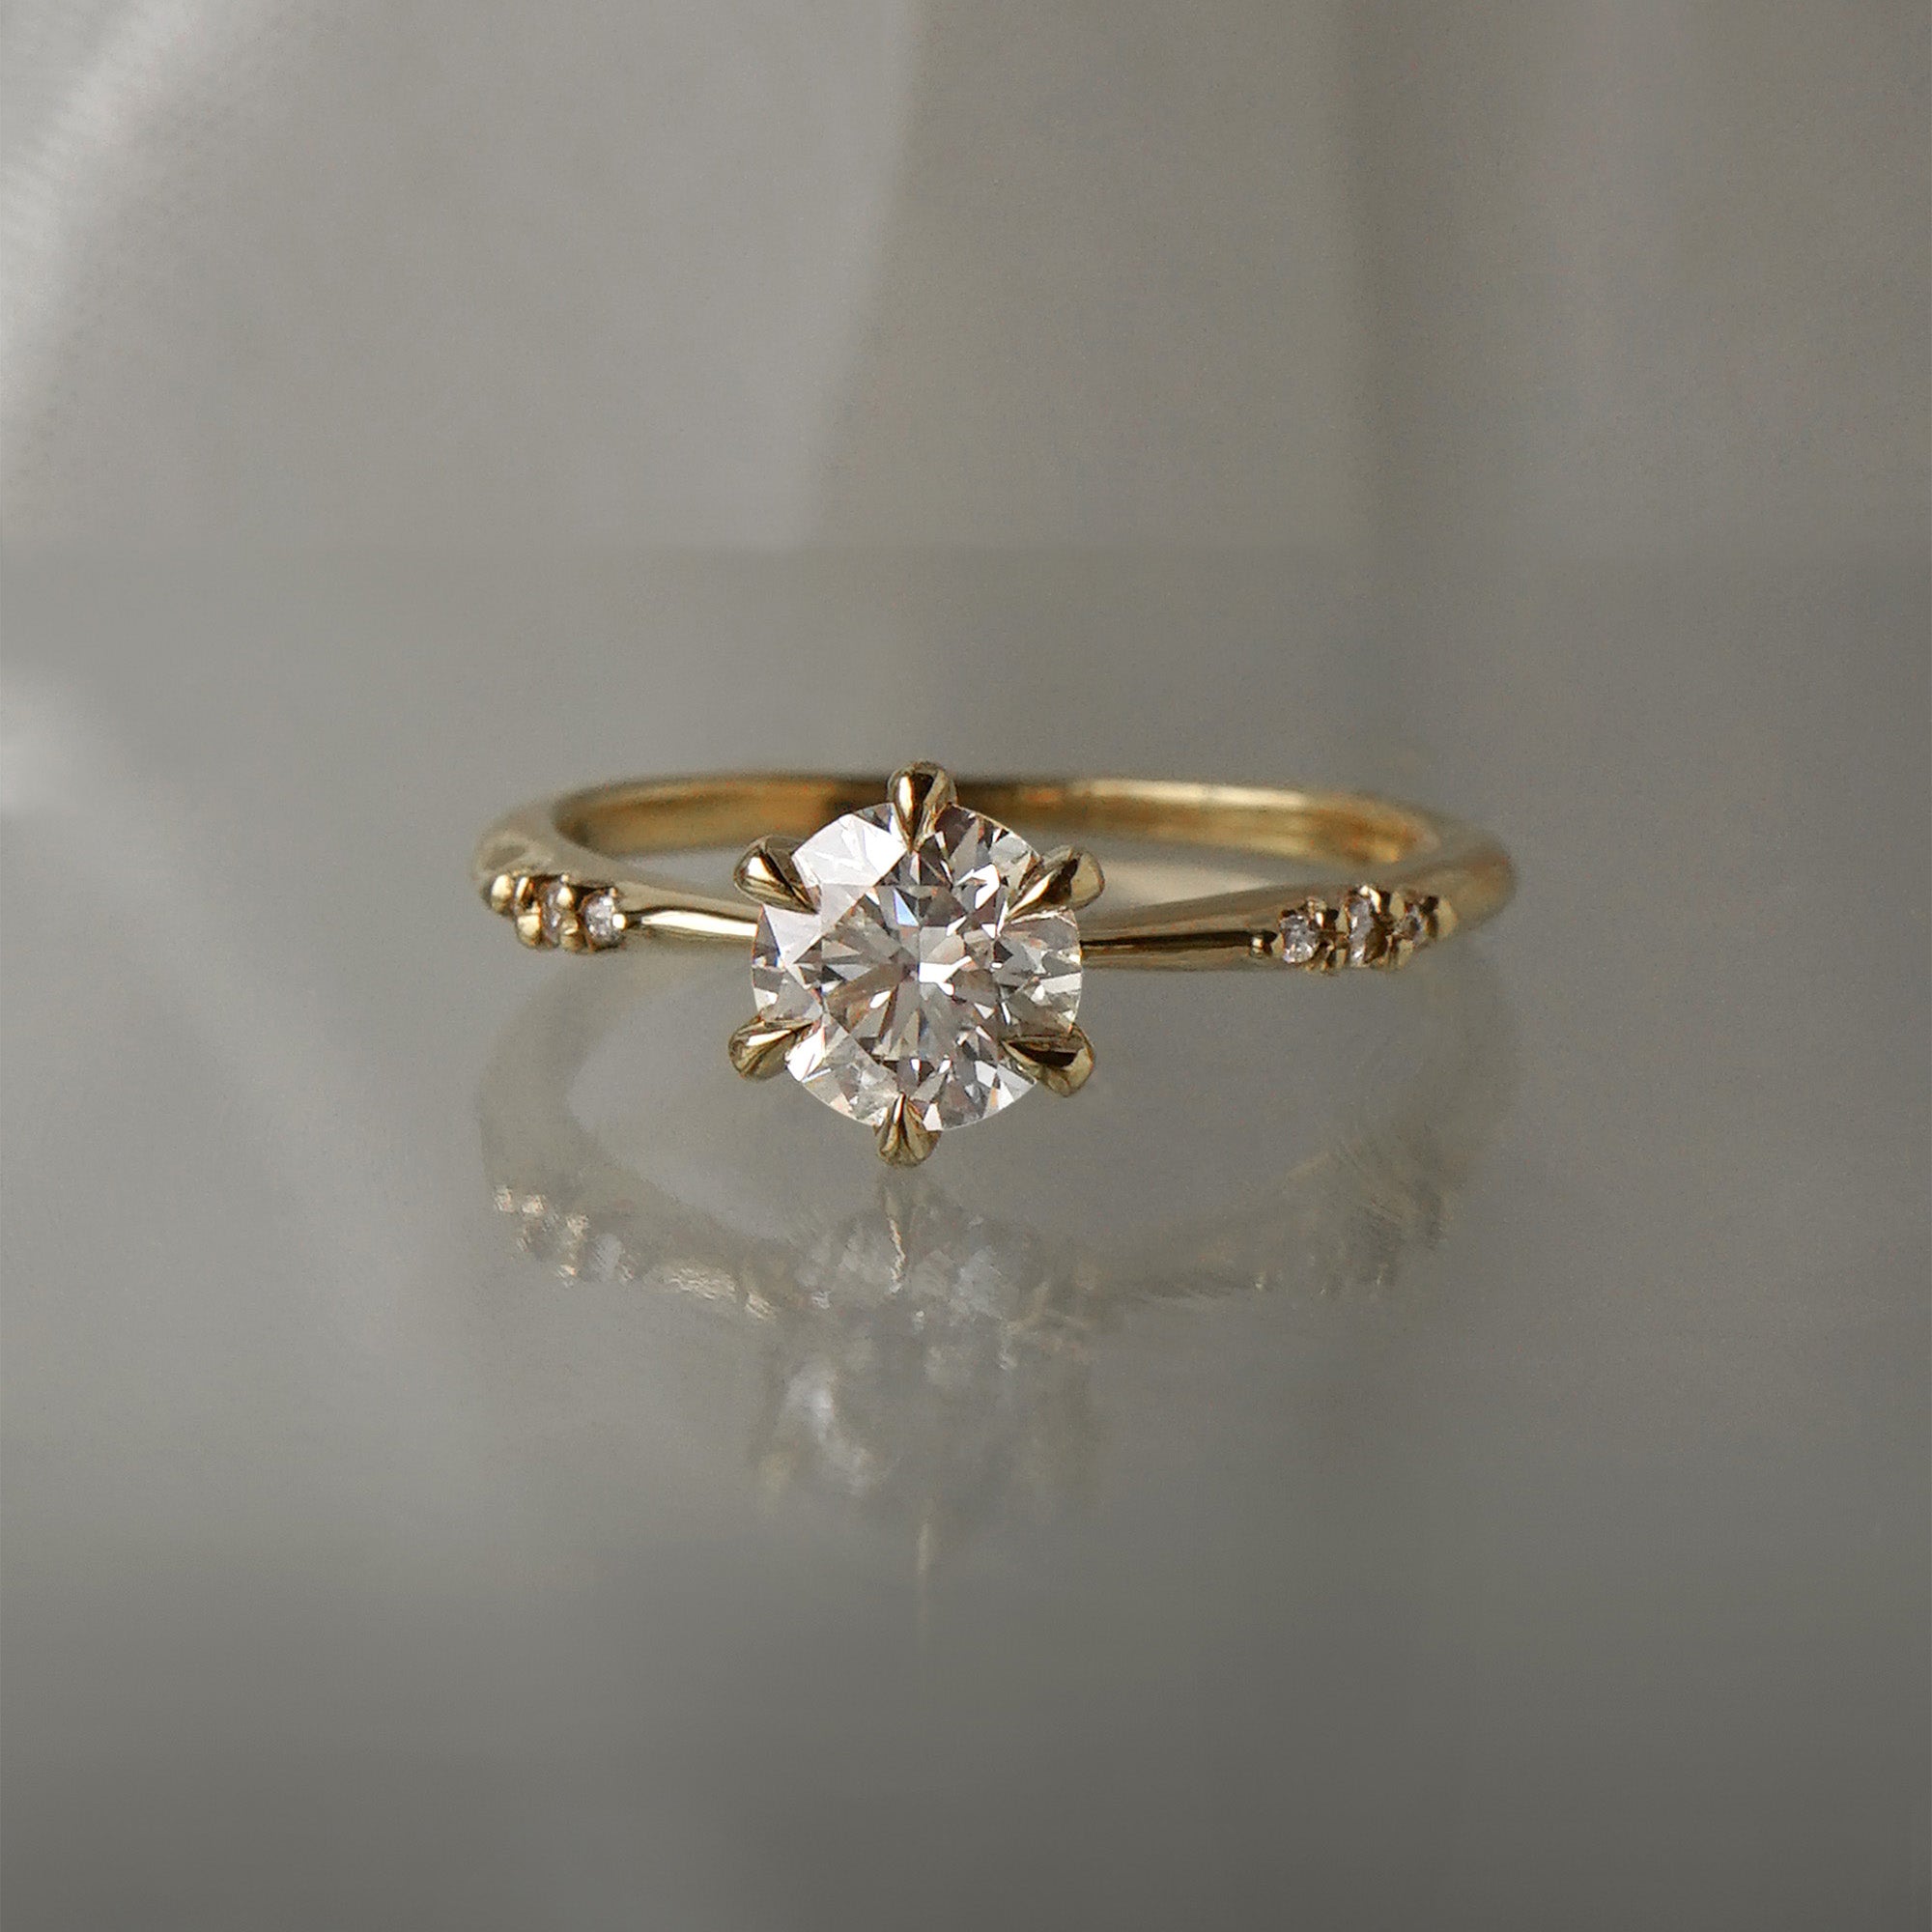 A delicate hand-carved one of a kind "Ilona" style engagement ring by Laurie Fleming Jewellery. The Ring features a 0.8ct round brilliant cut diamond, a tapered knife-edge band, and small diamond accents on the band shoulders.  The ring is situated against a medium grey background.